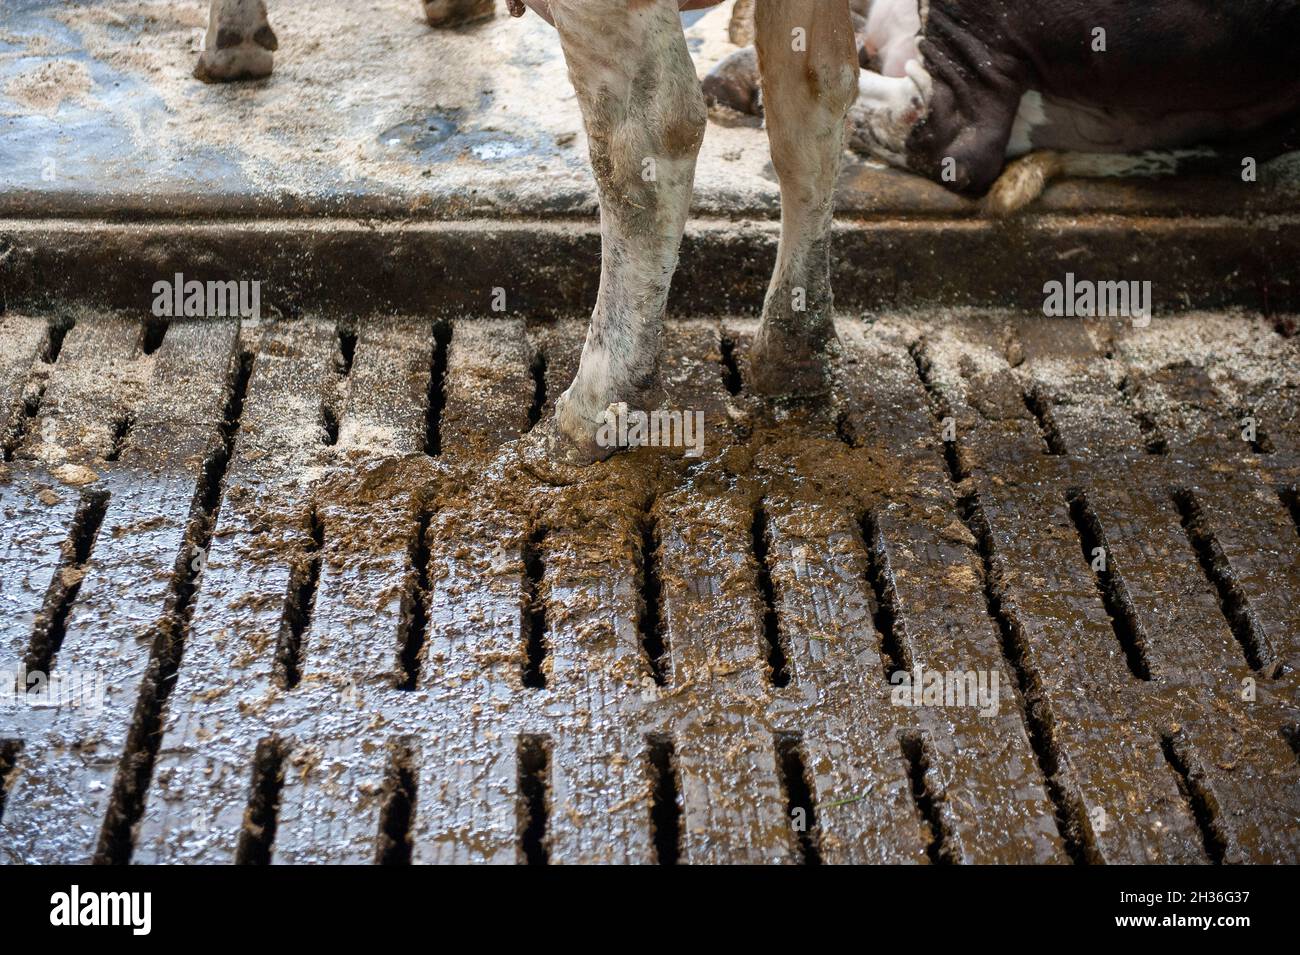 A milkcow in a cowshed on a Dutch farm has just pooped. Stock Photo